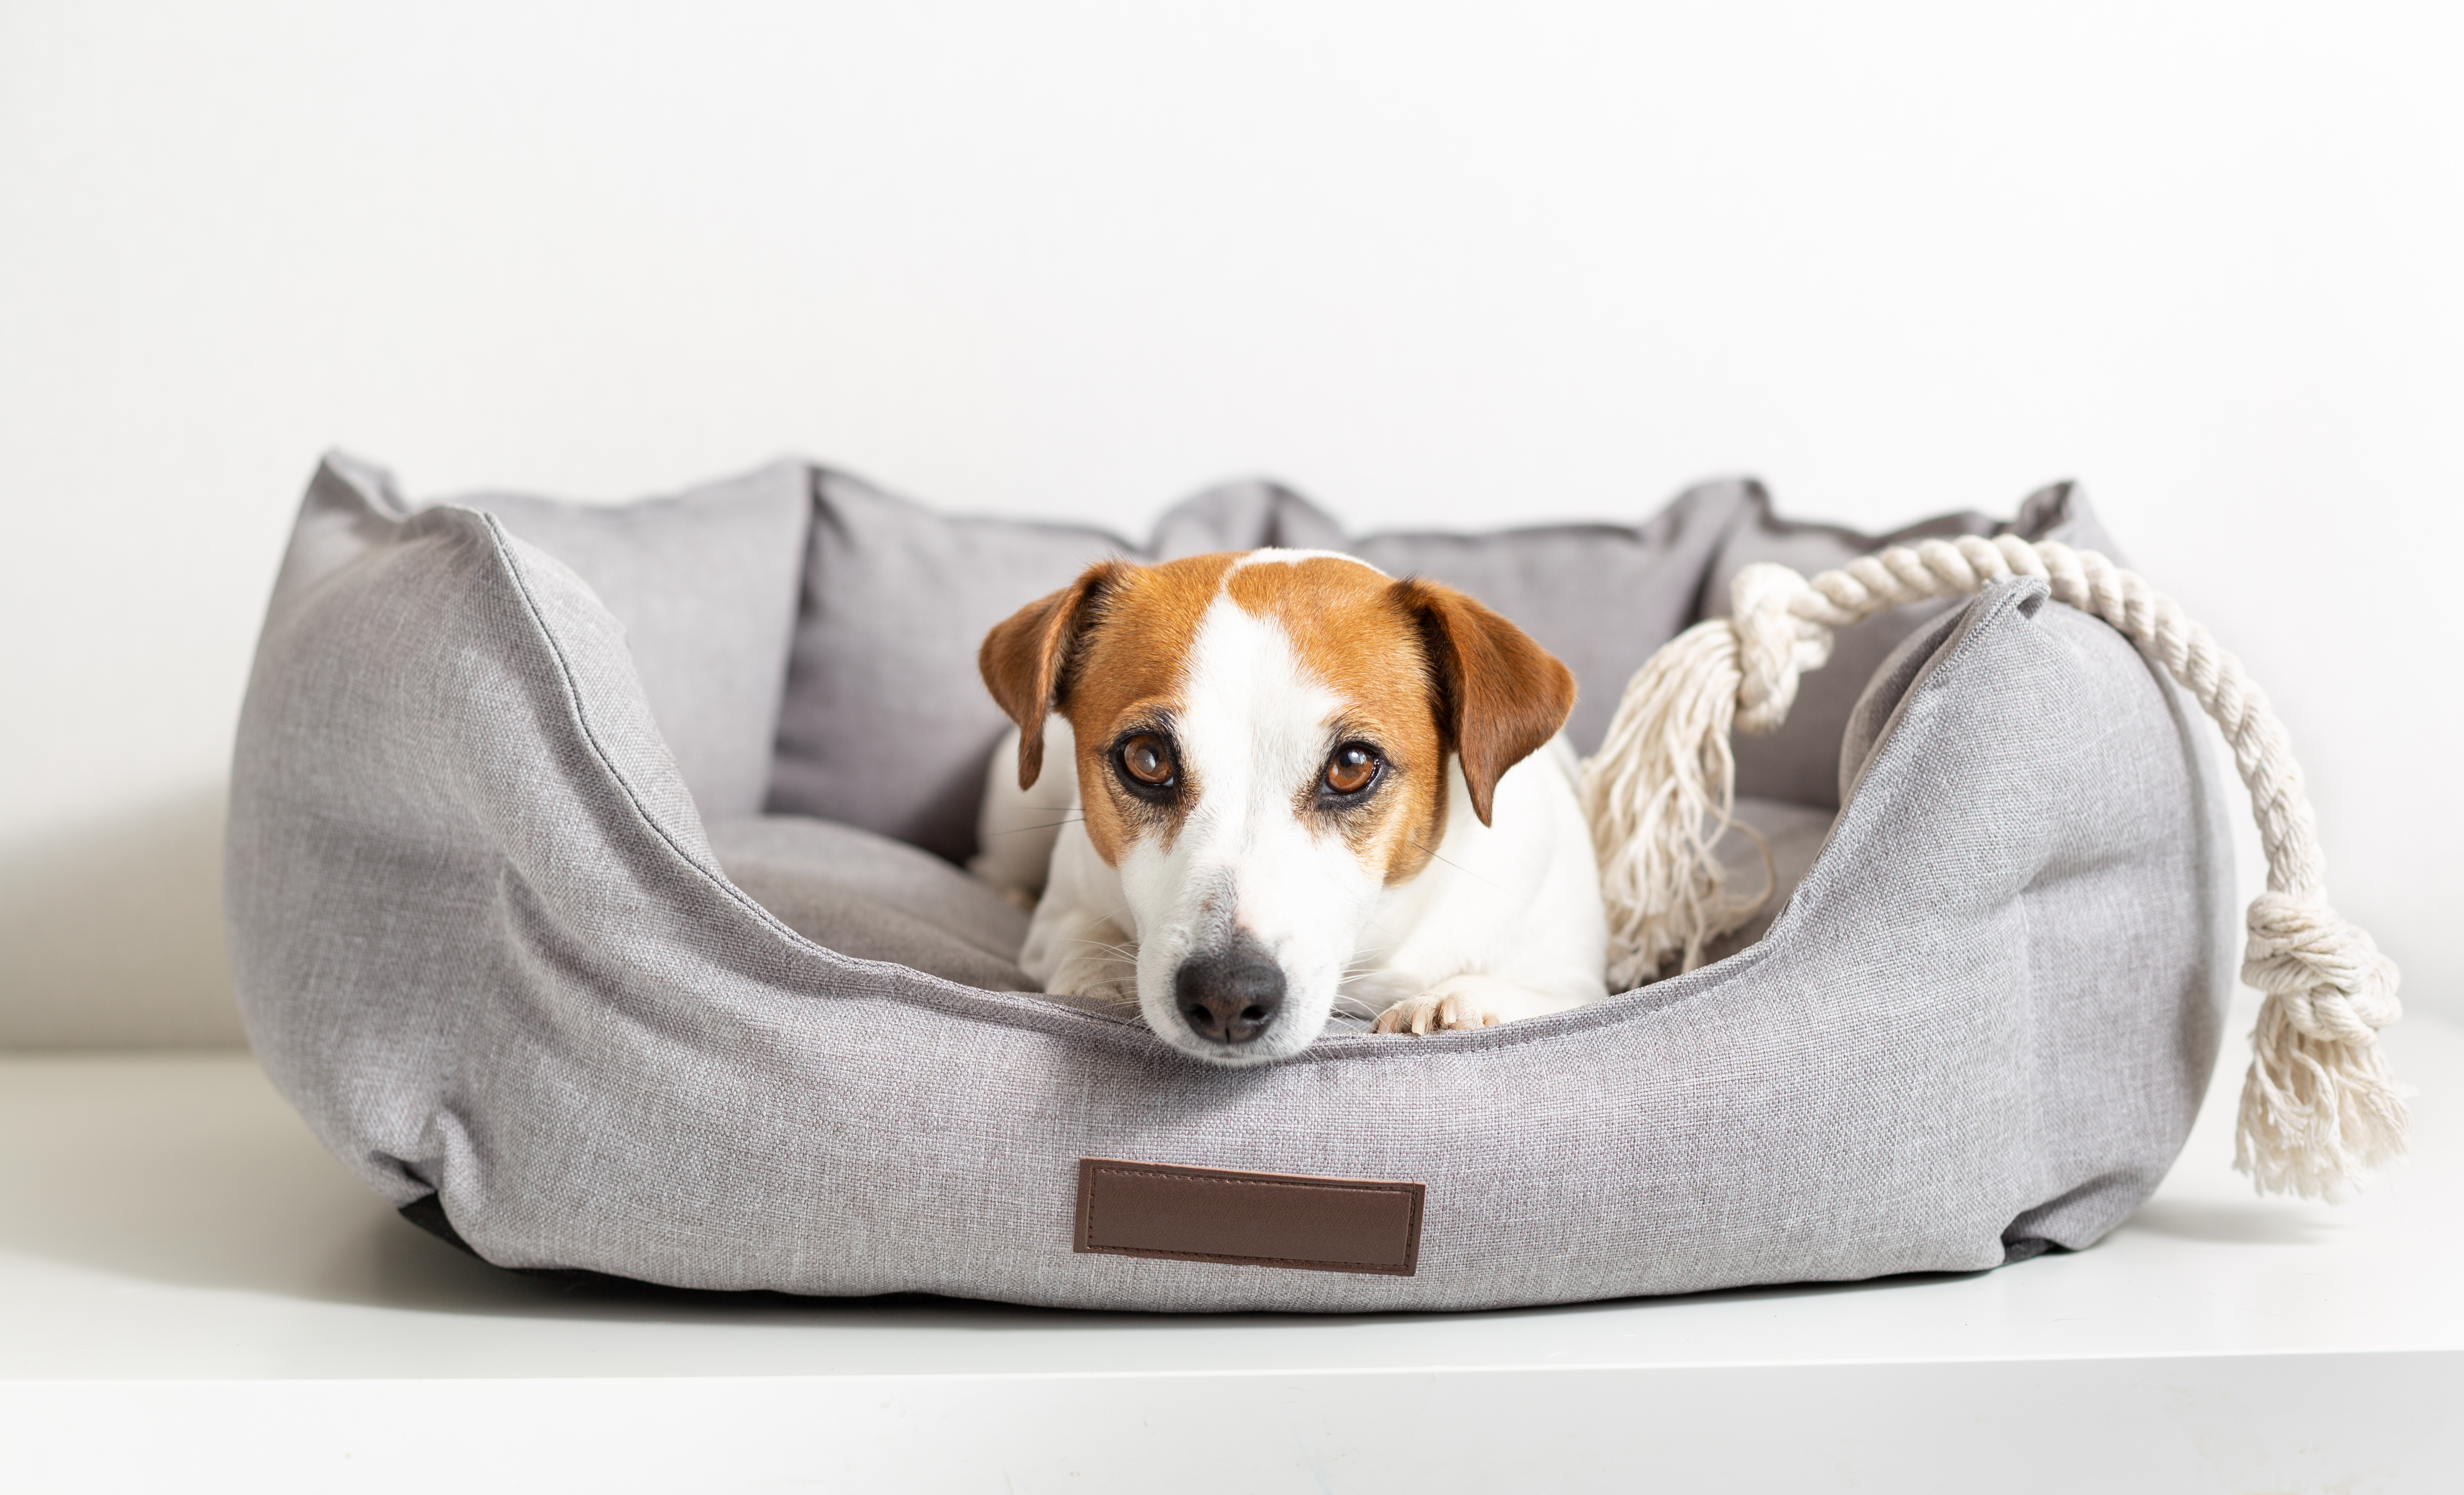 Portrait of a dog jack russell terrier lying in a pet bed and looking at camera.